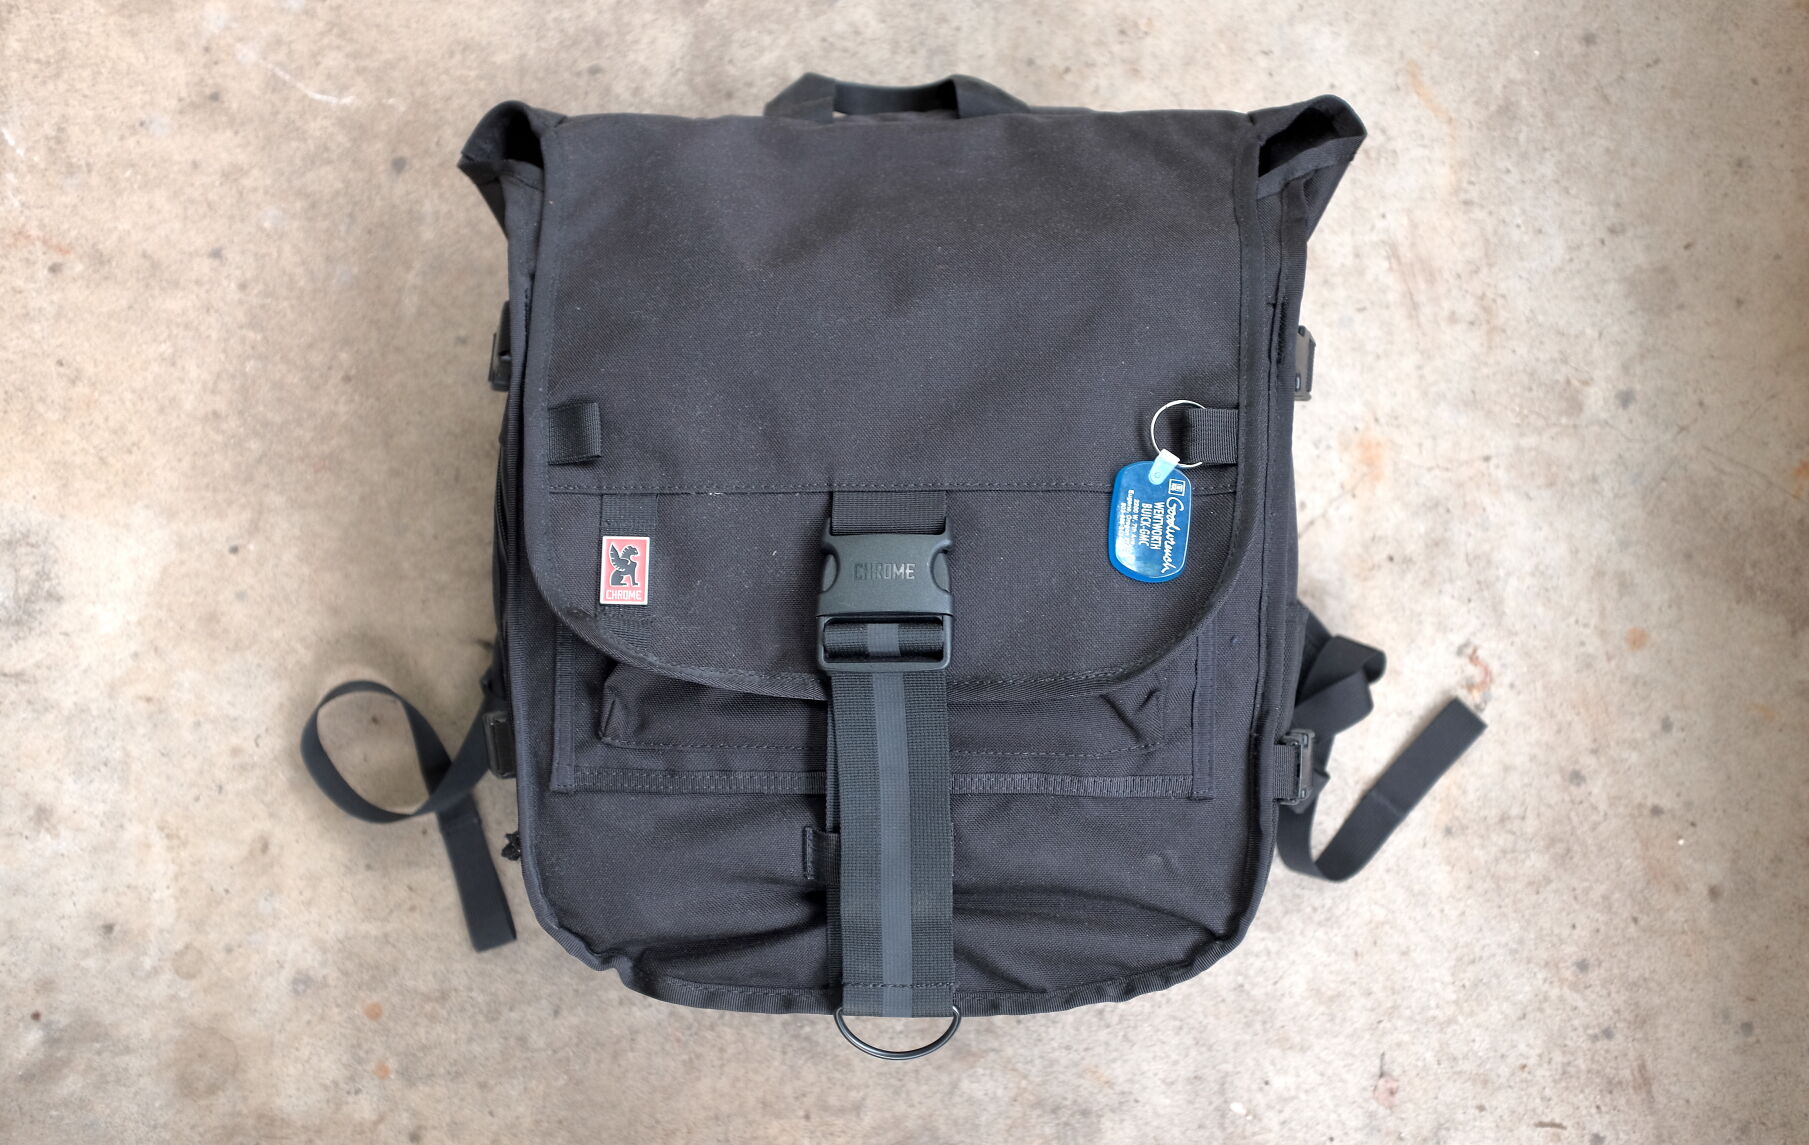 Shifting Gear: Chrome Warsaw MD backpack review | Fashion 